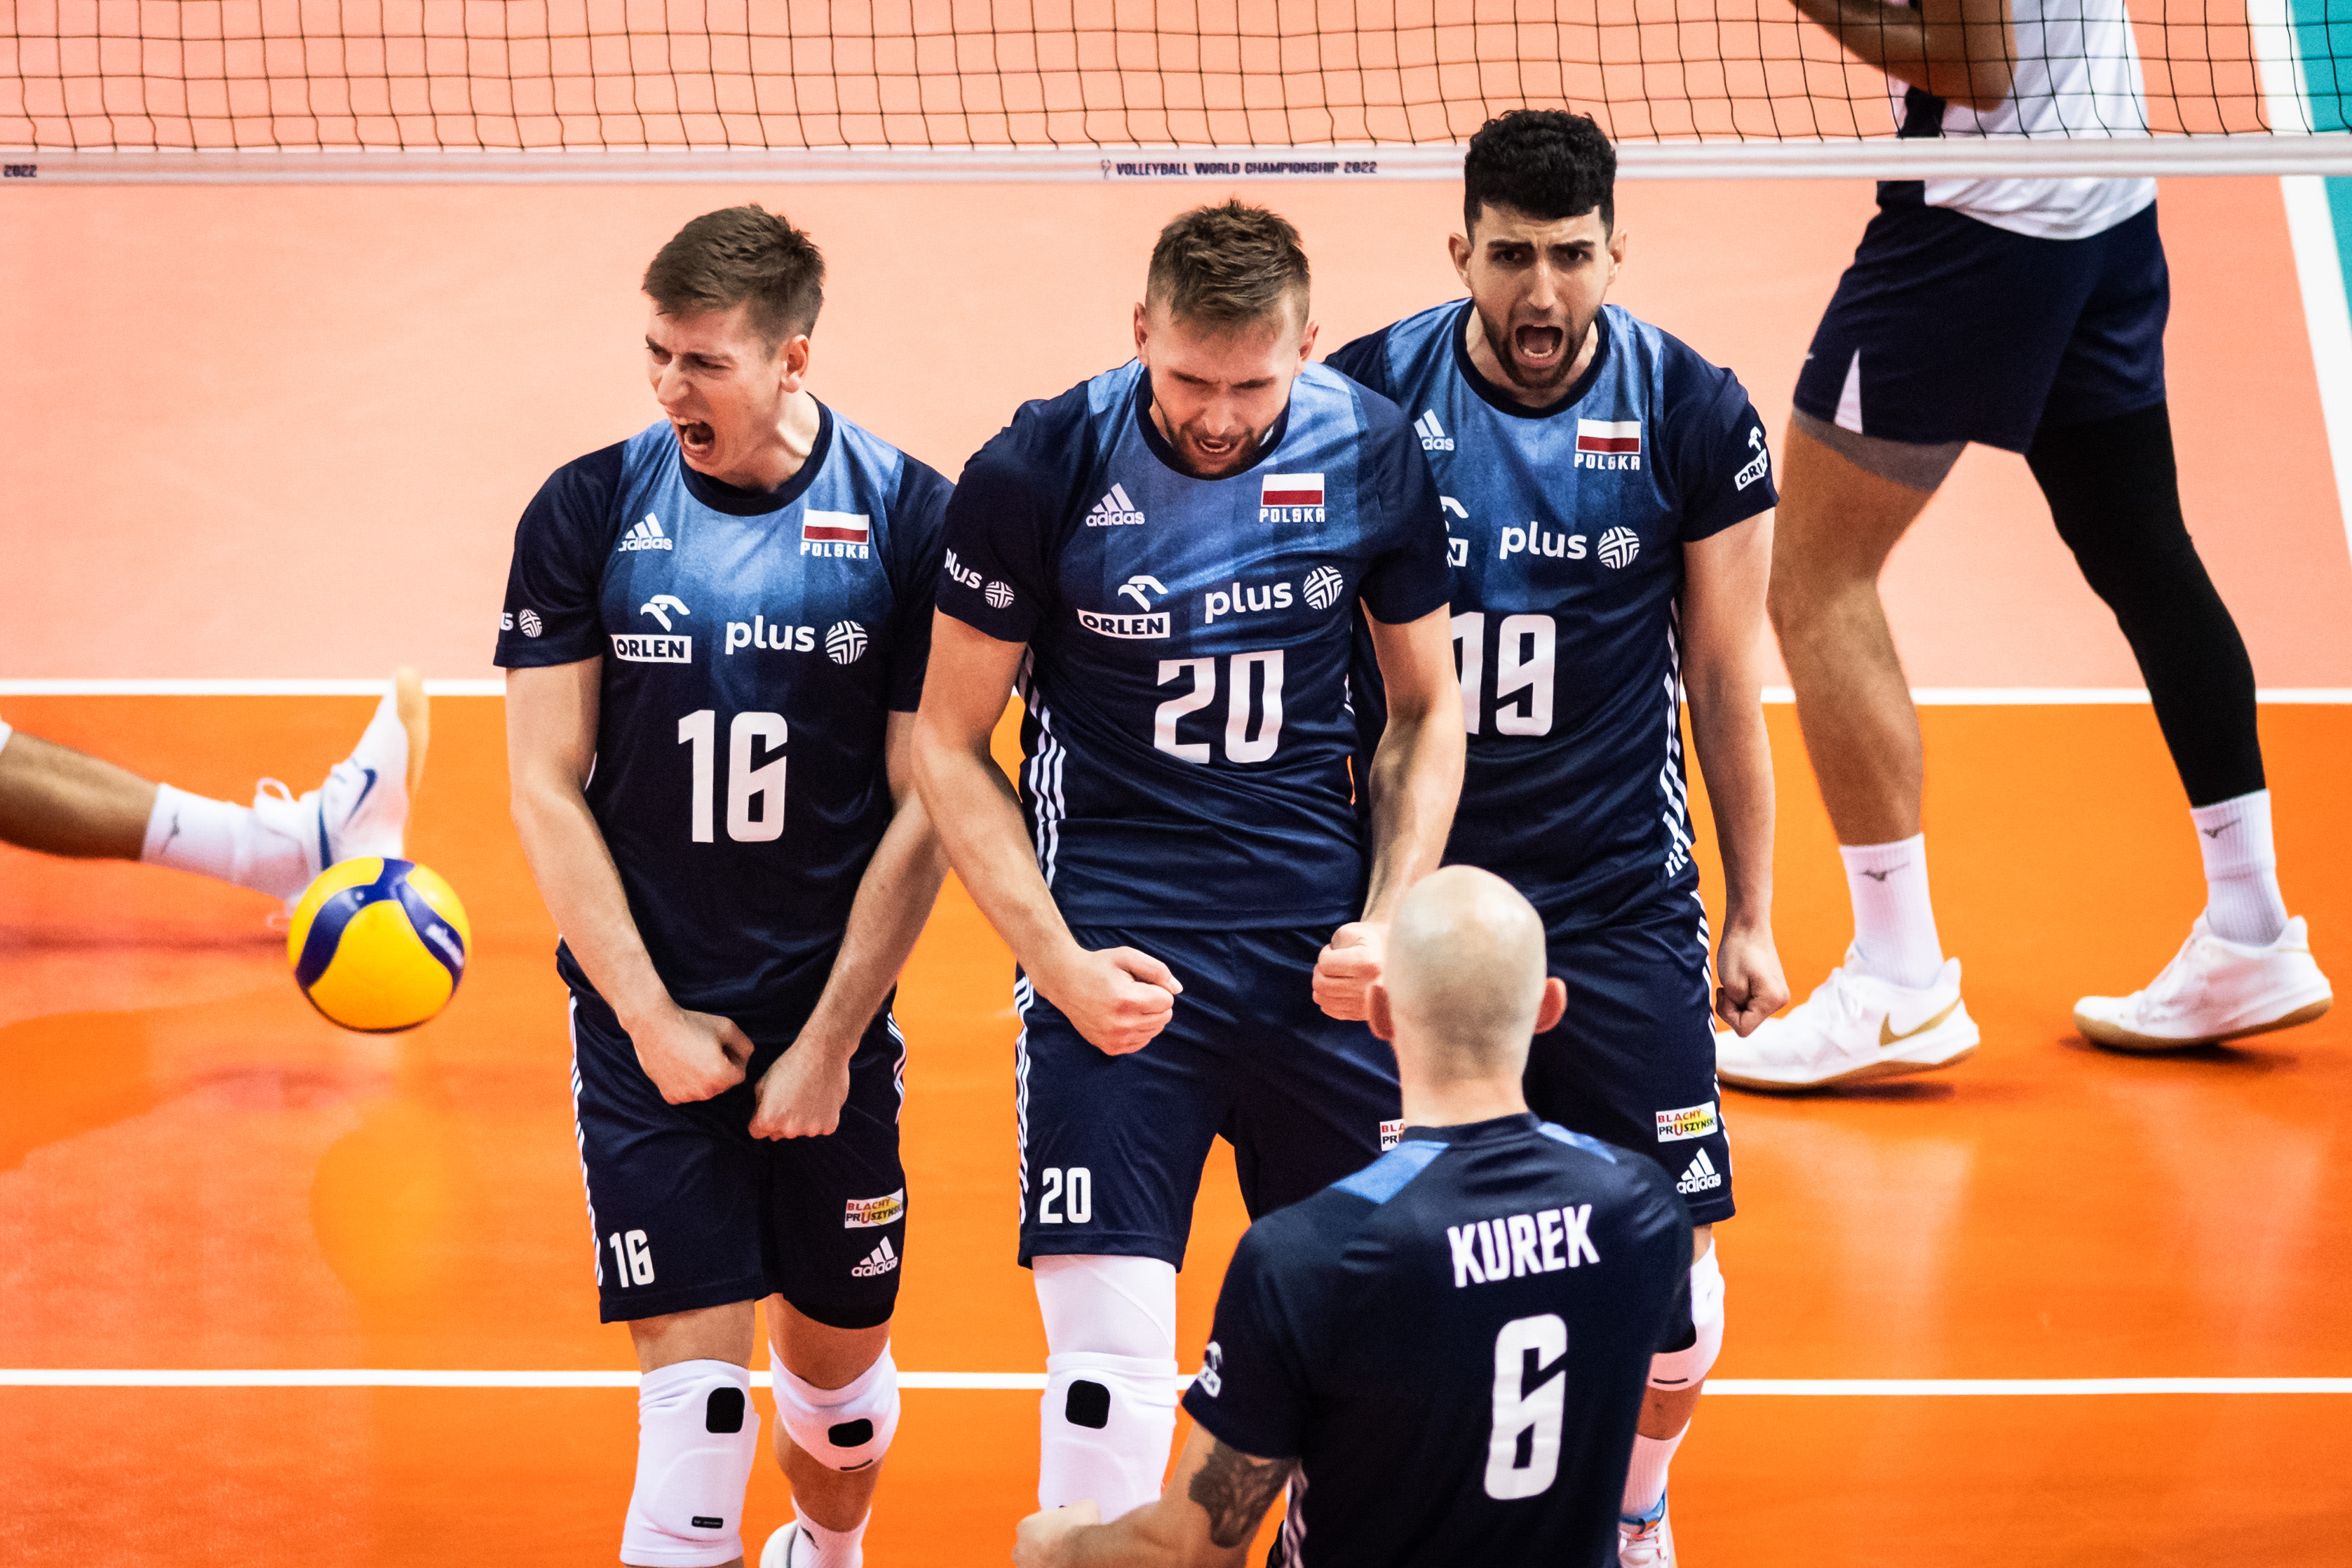 Poland at the top after comeback win over the United States volleyballworld